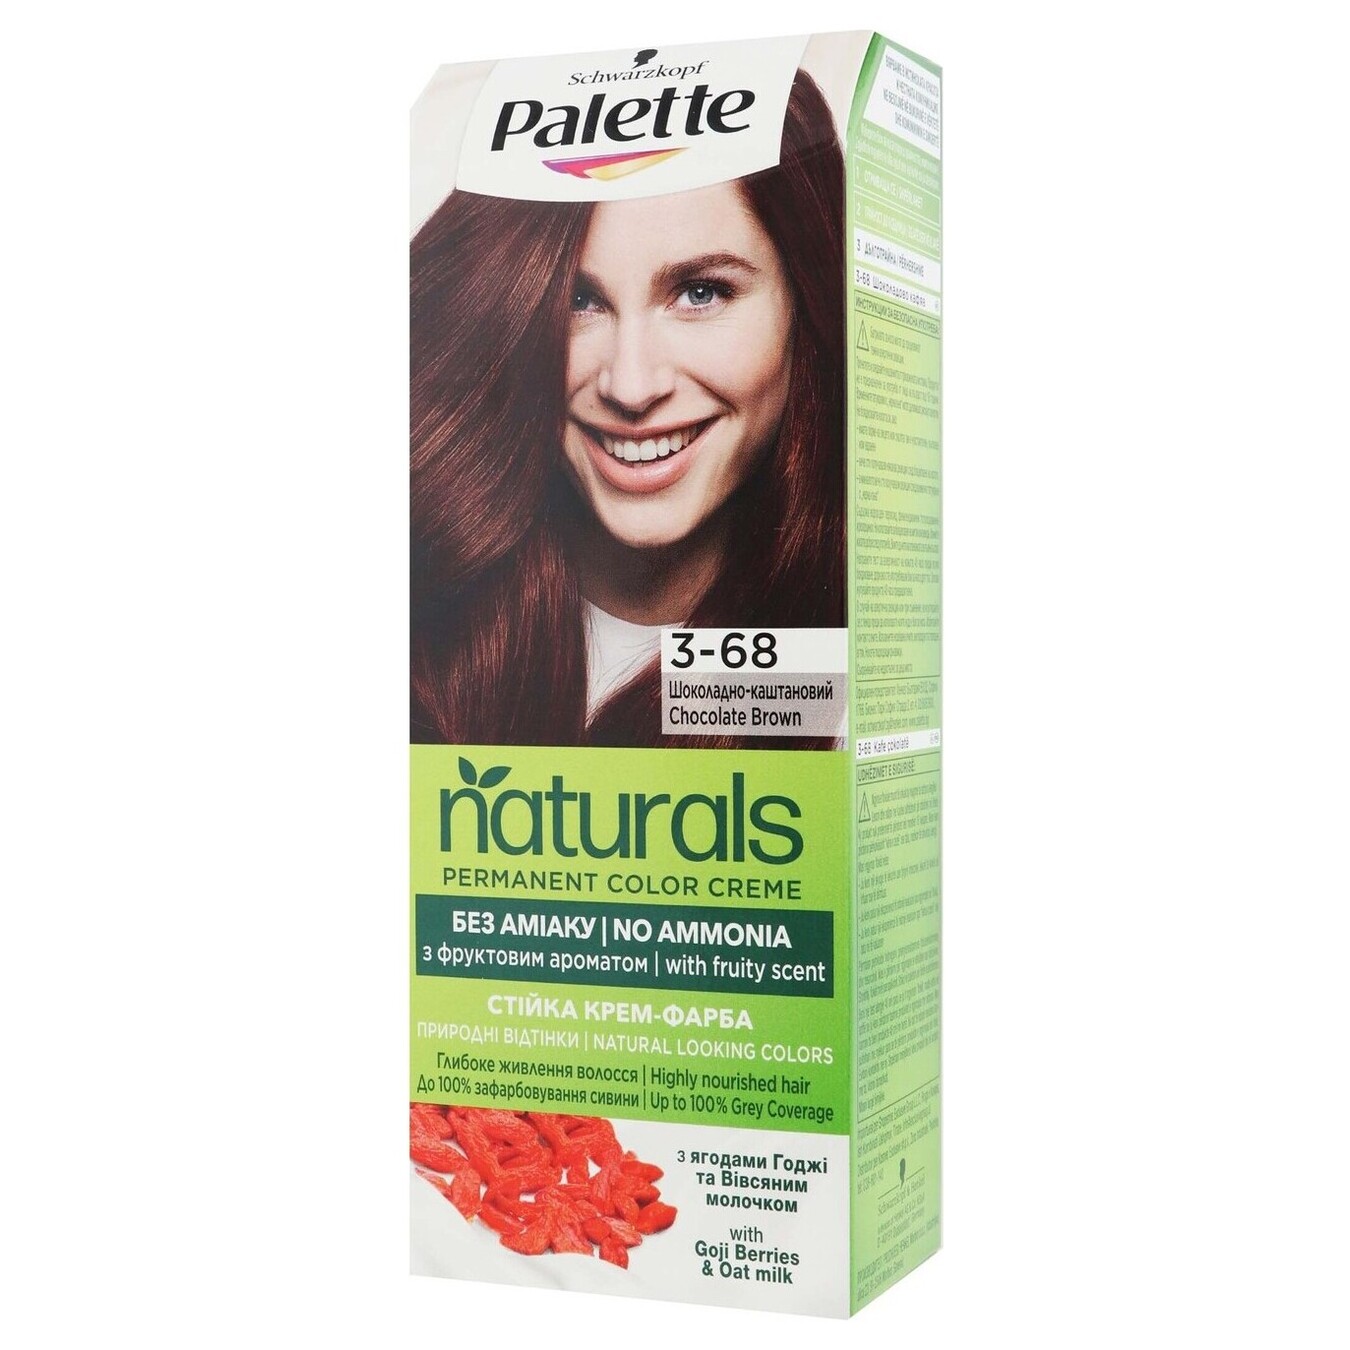 Cream paint Palette Naturals 3-68 Chocolate-chestnut without ammonia permanent hair color 110ml 2